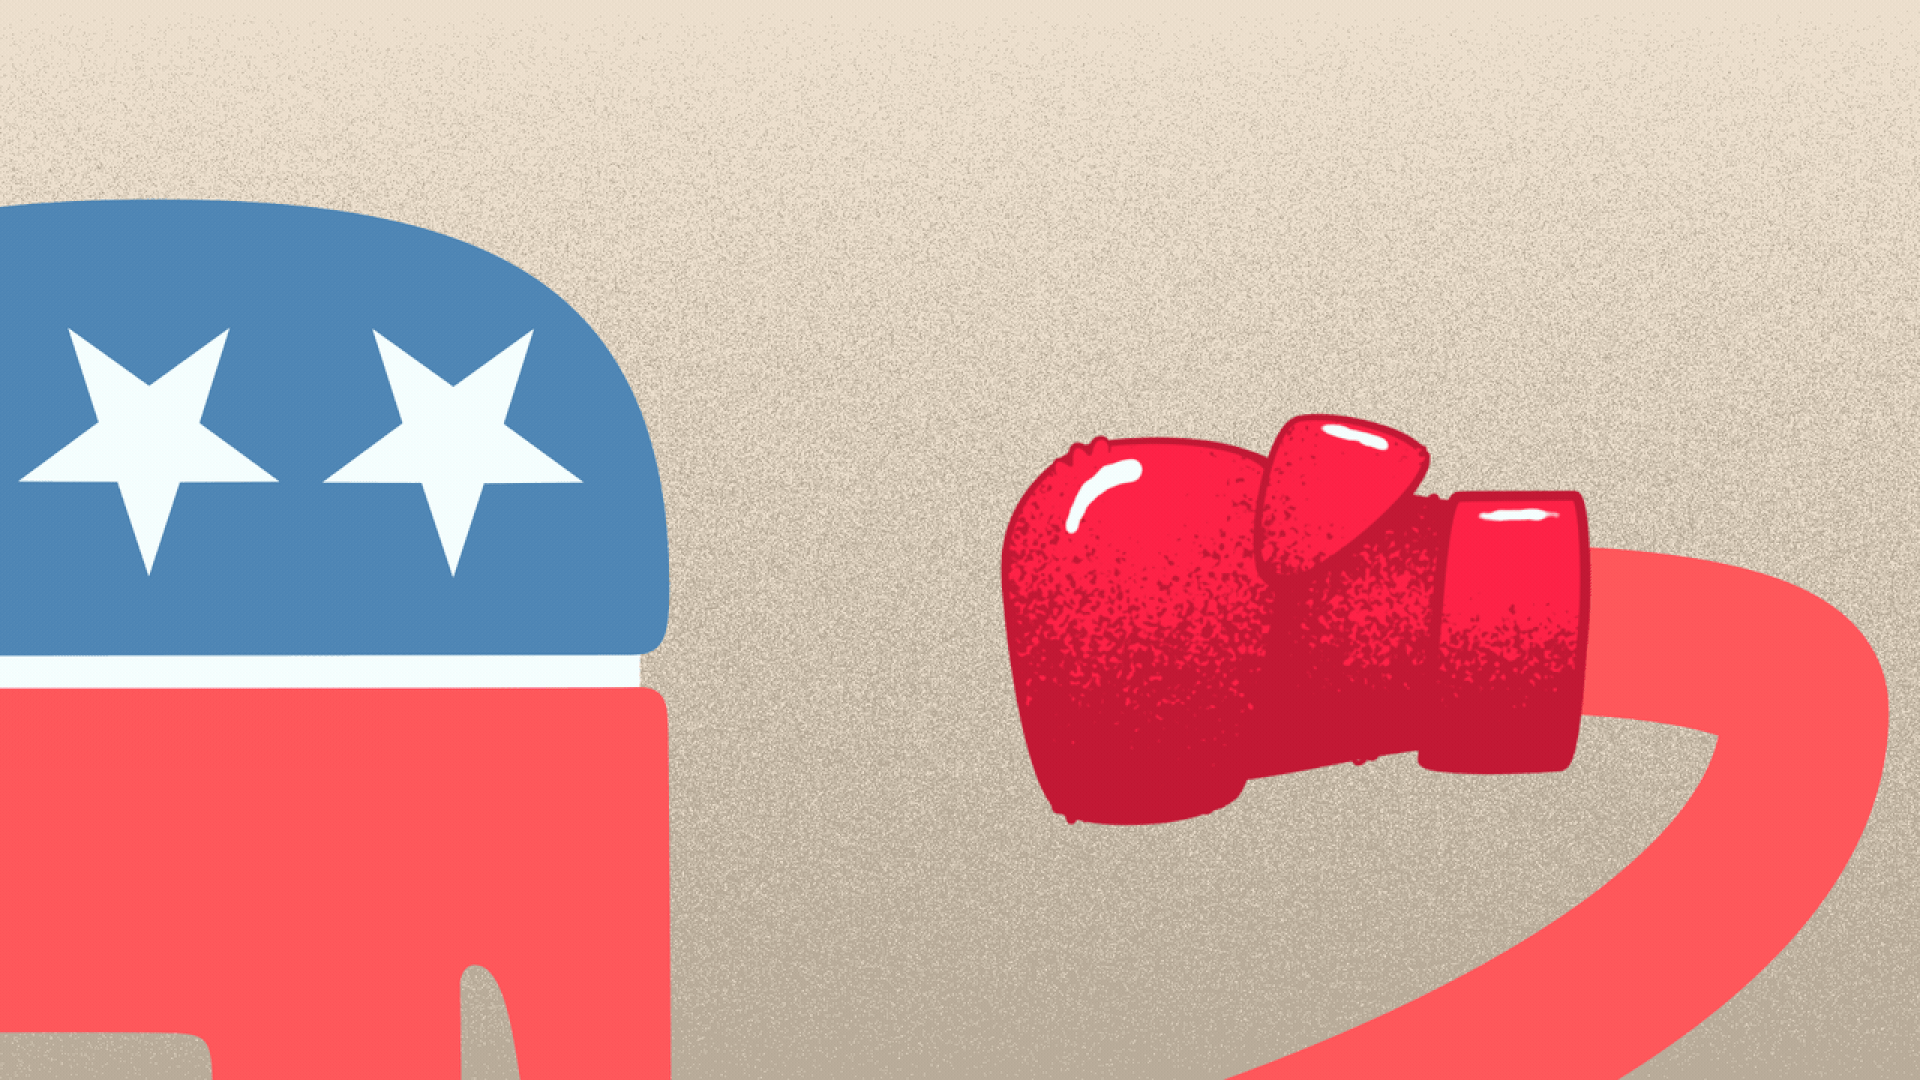 Illustration of the Republican elephant logo with a boxing glove on its trunk, punching itself in the face.